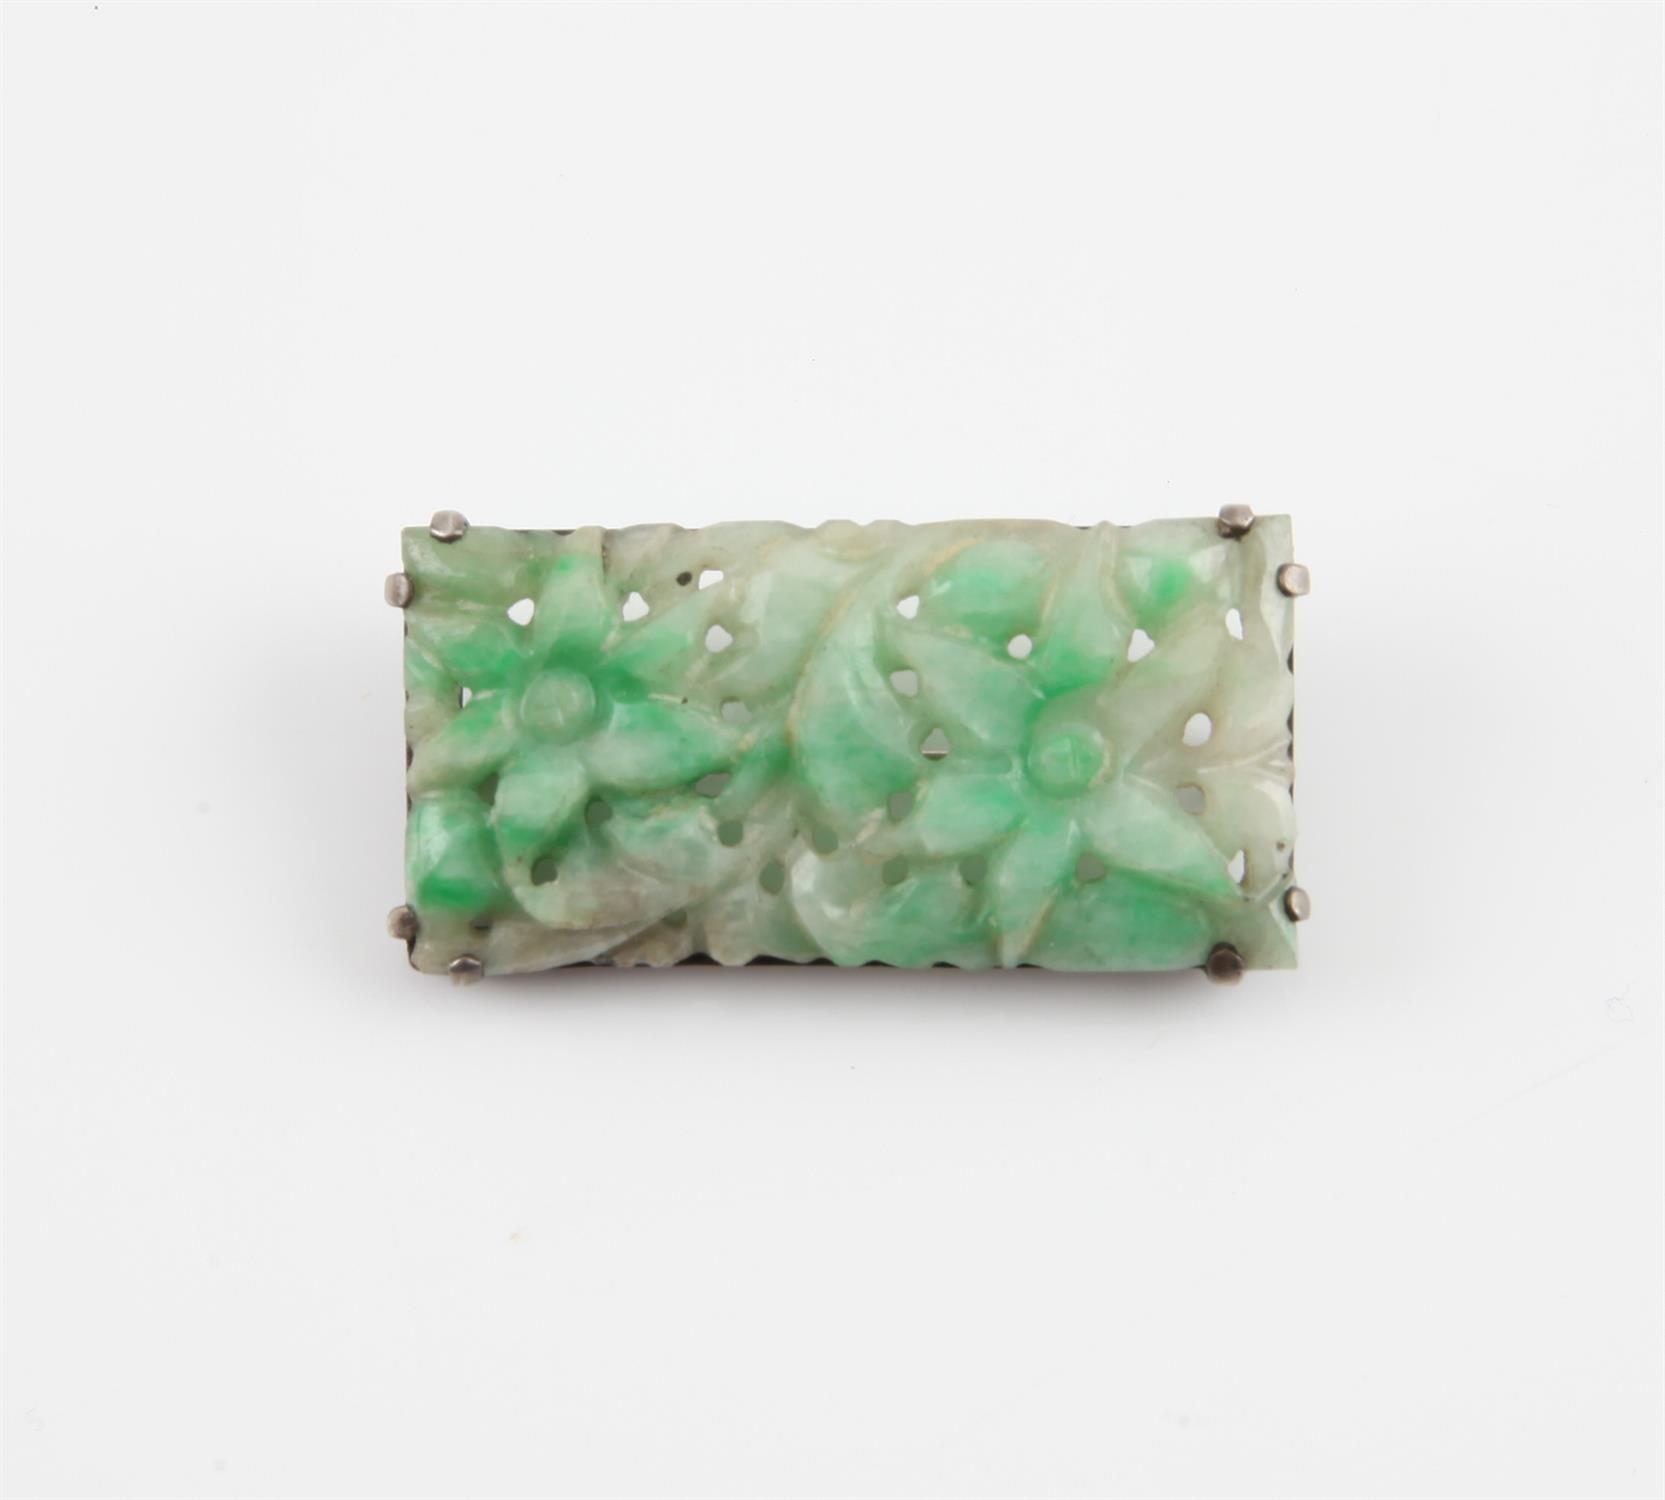 Chinese silver and jade brooch, Republic period, c1920. The Jade carved with a floral design. 4.